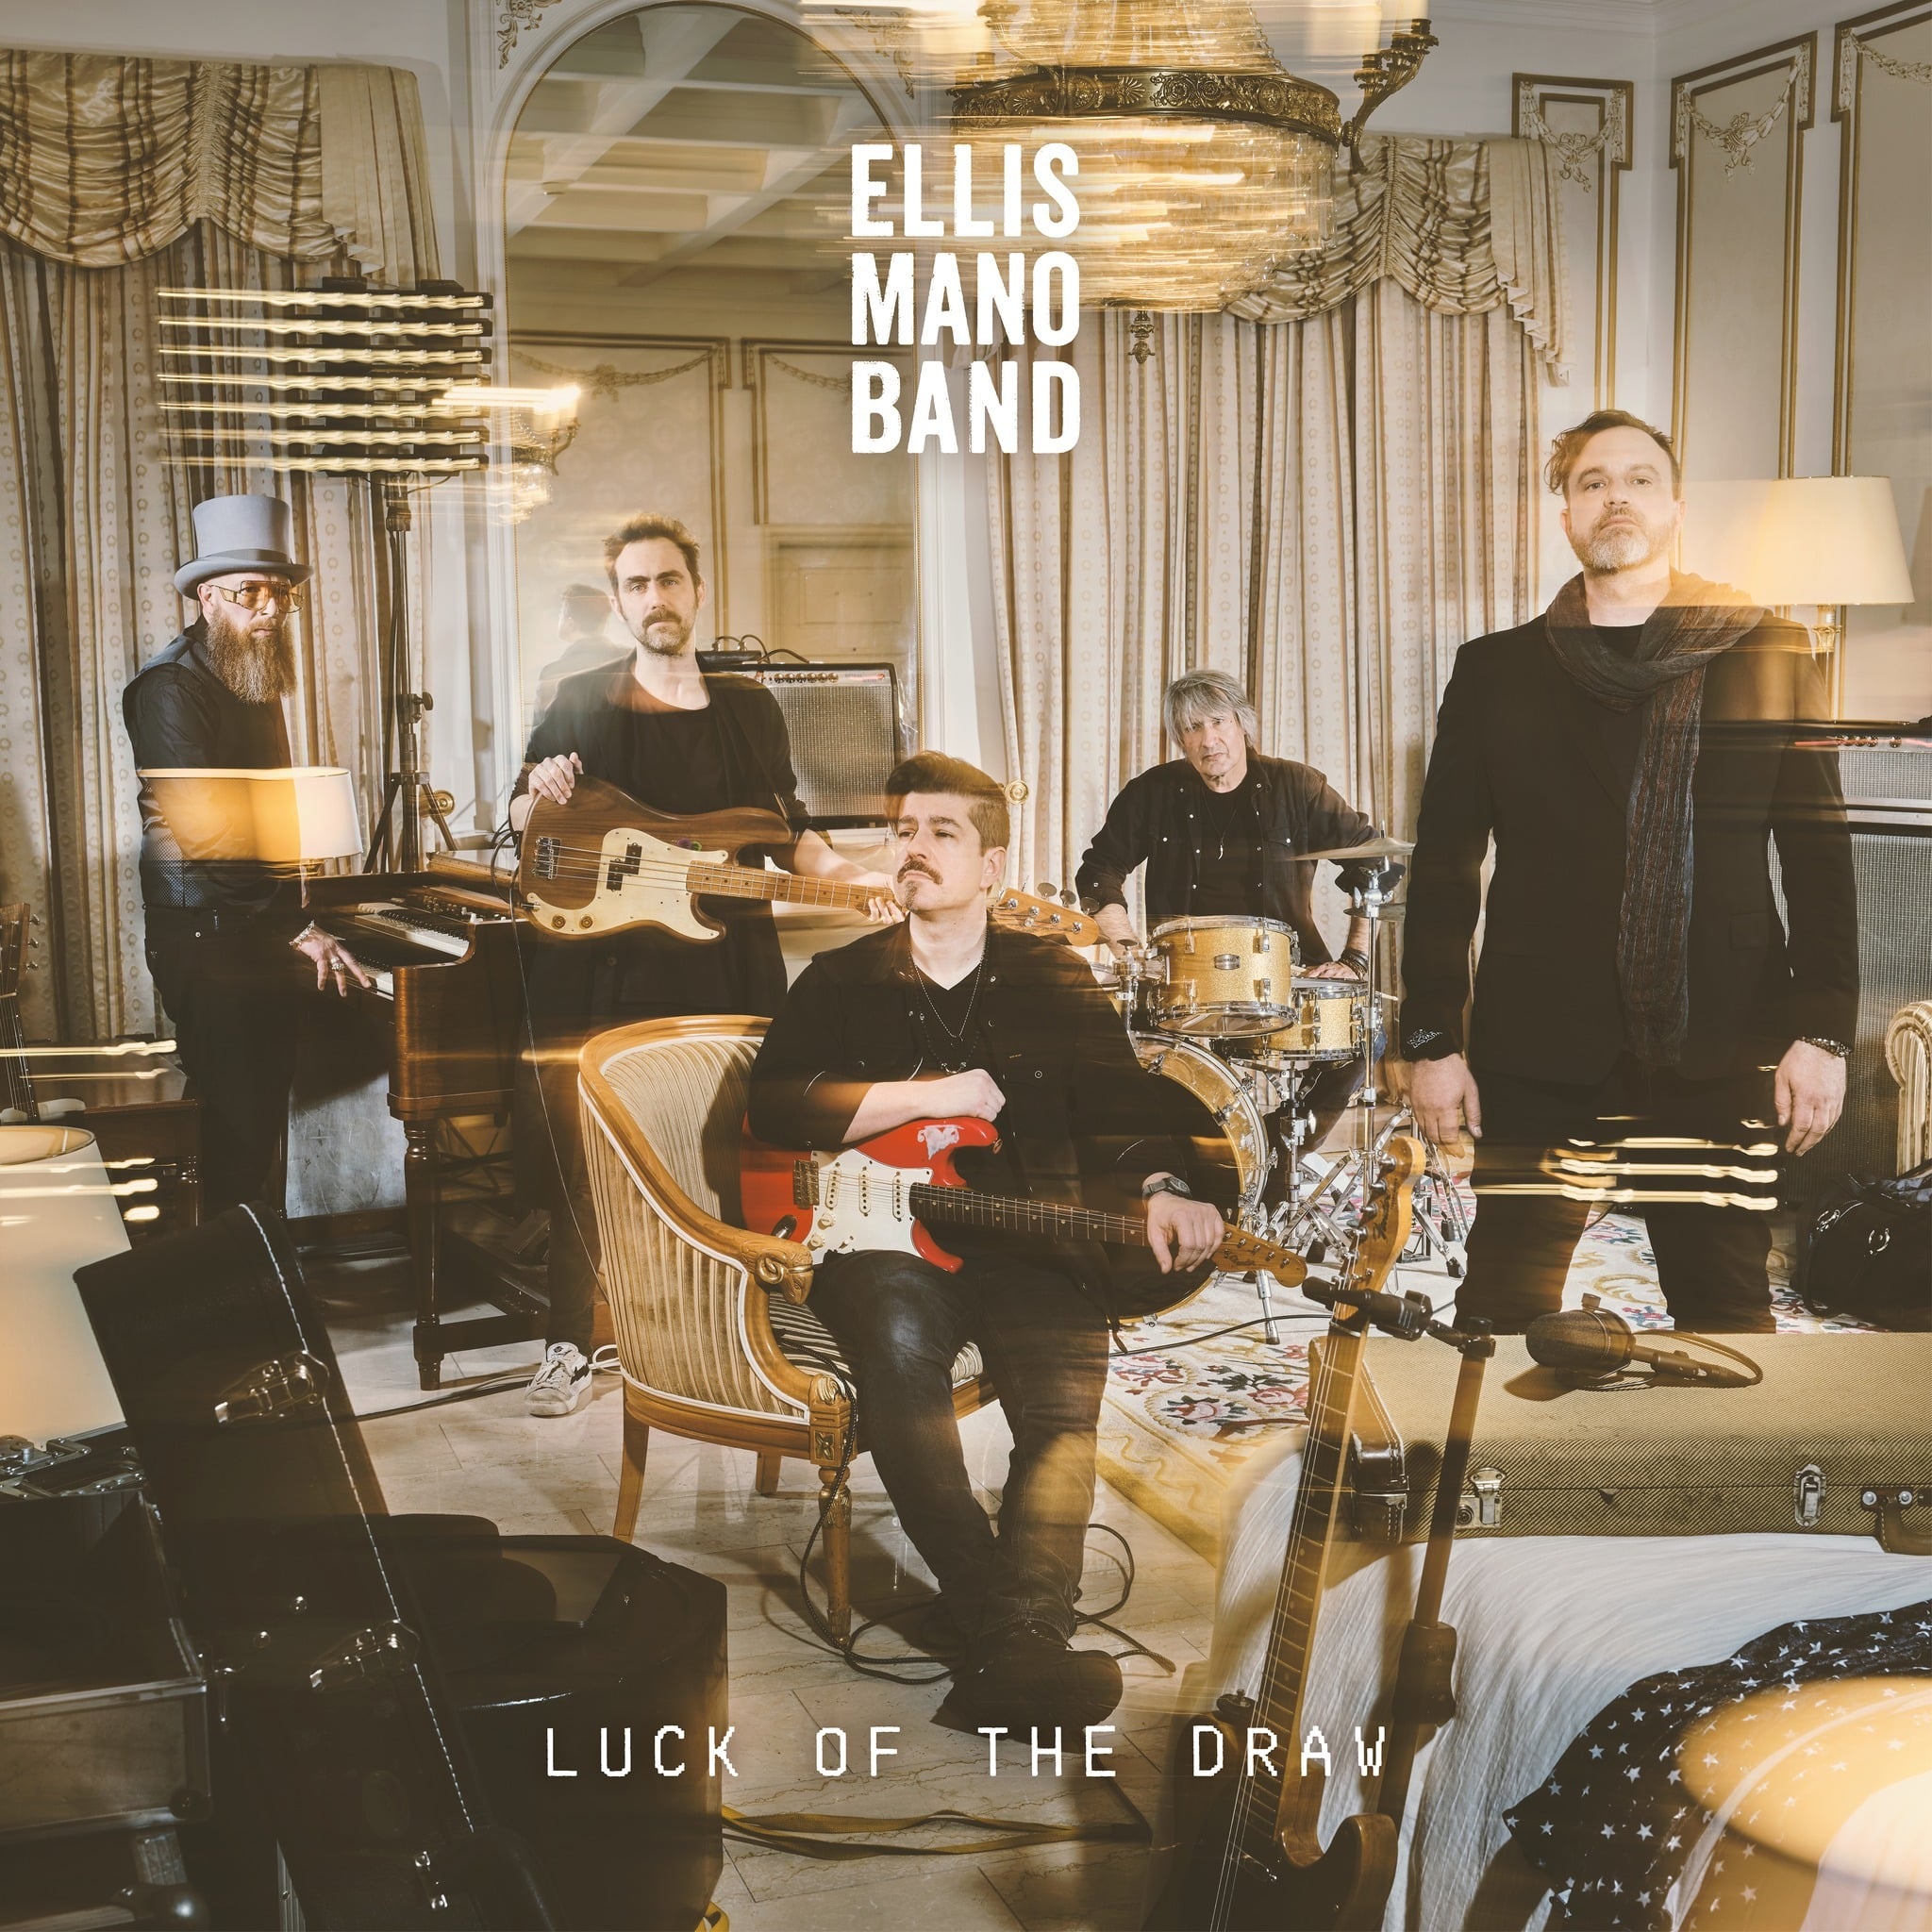 Ellis Mano Band - Luck of the Deal